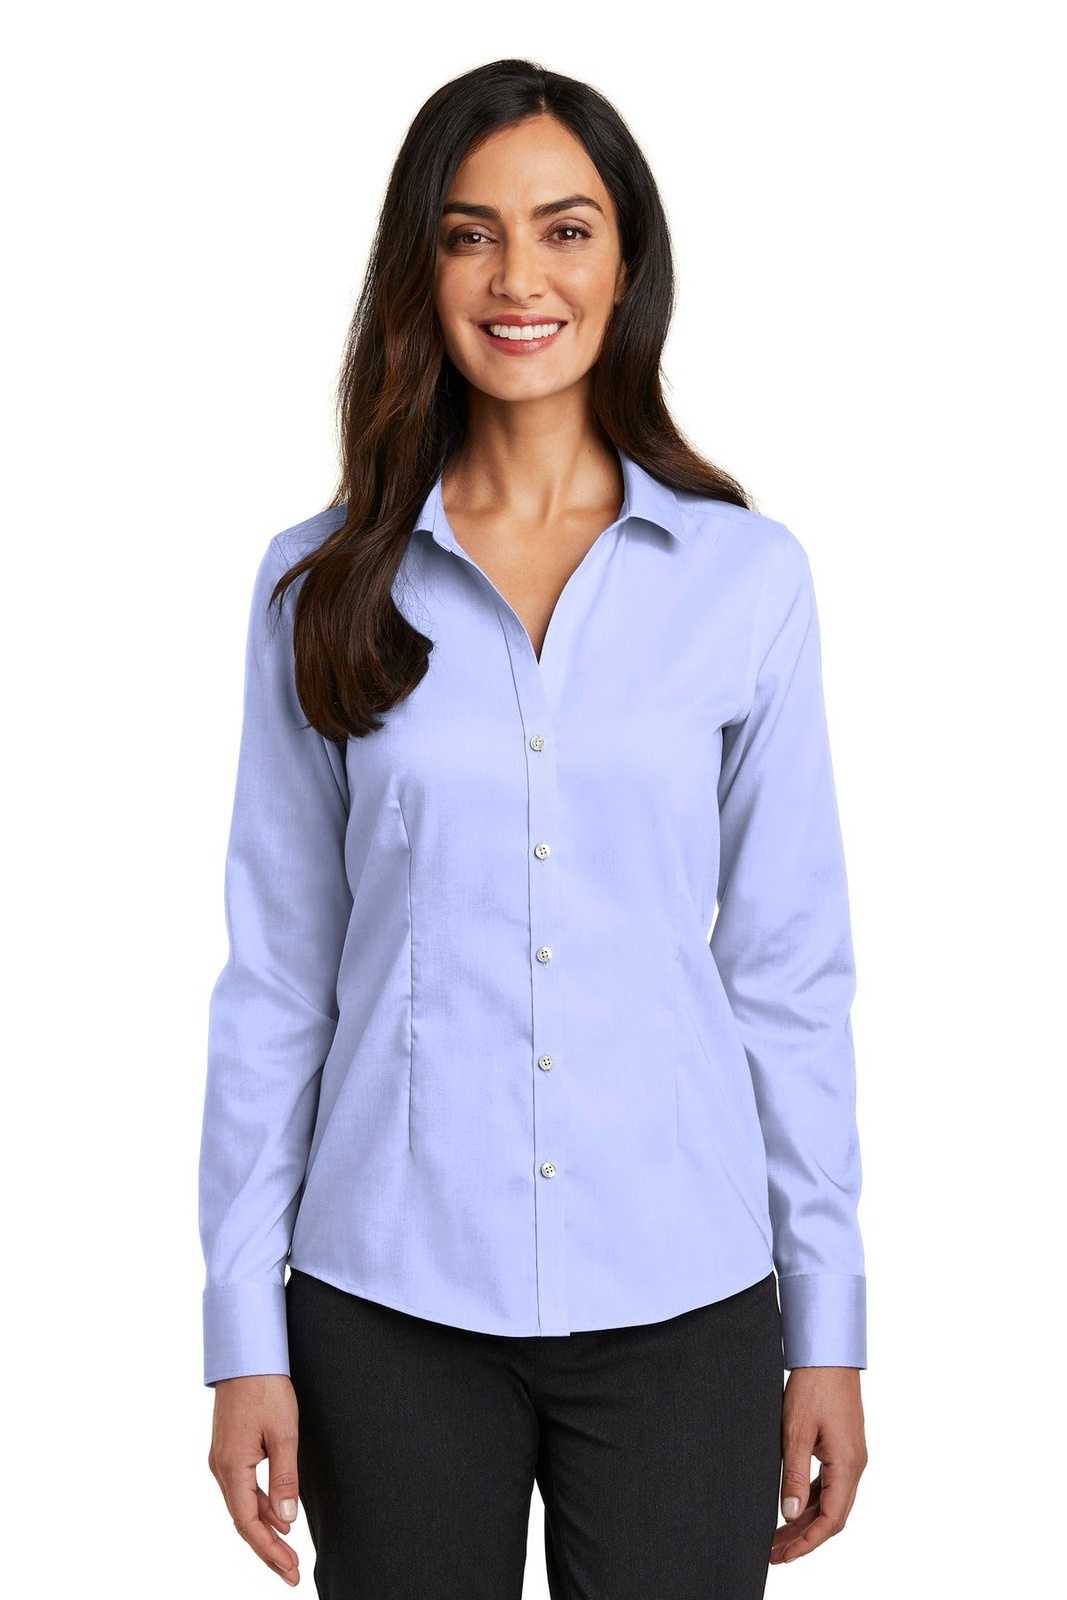 Red House RH250 Ladies Pinpoint Oxford Non-Iron Shirt - Blue - HIT a Double - 1